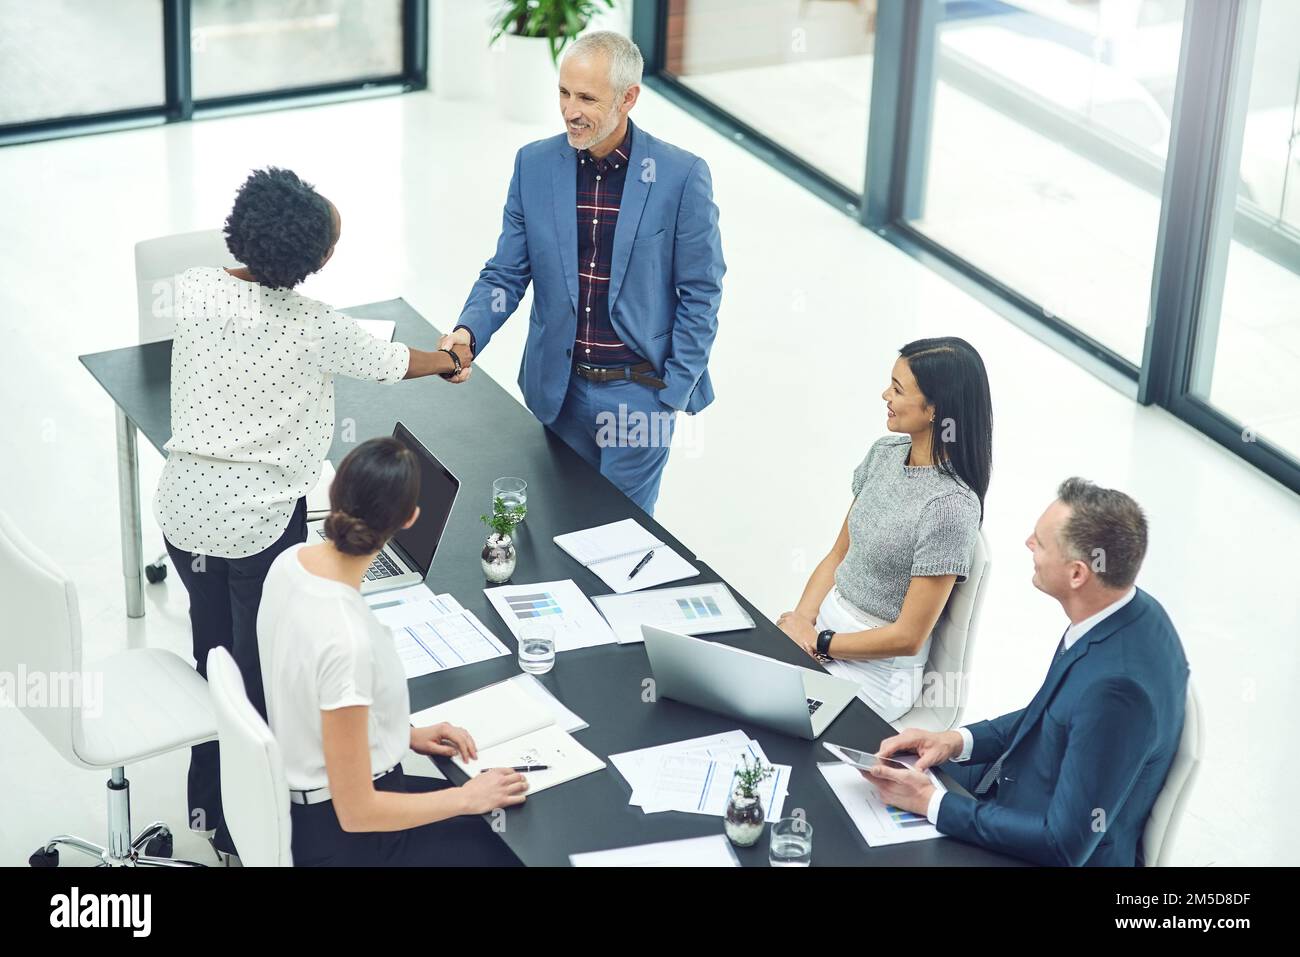 Exceptional work never goes unnoticed. businesspeople shaking hands during an office meeting. Stock Photo